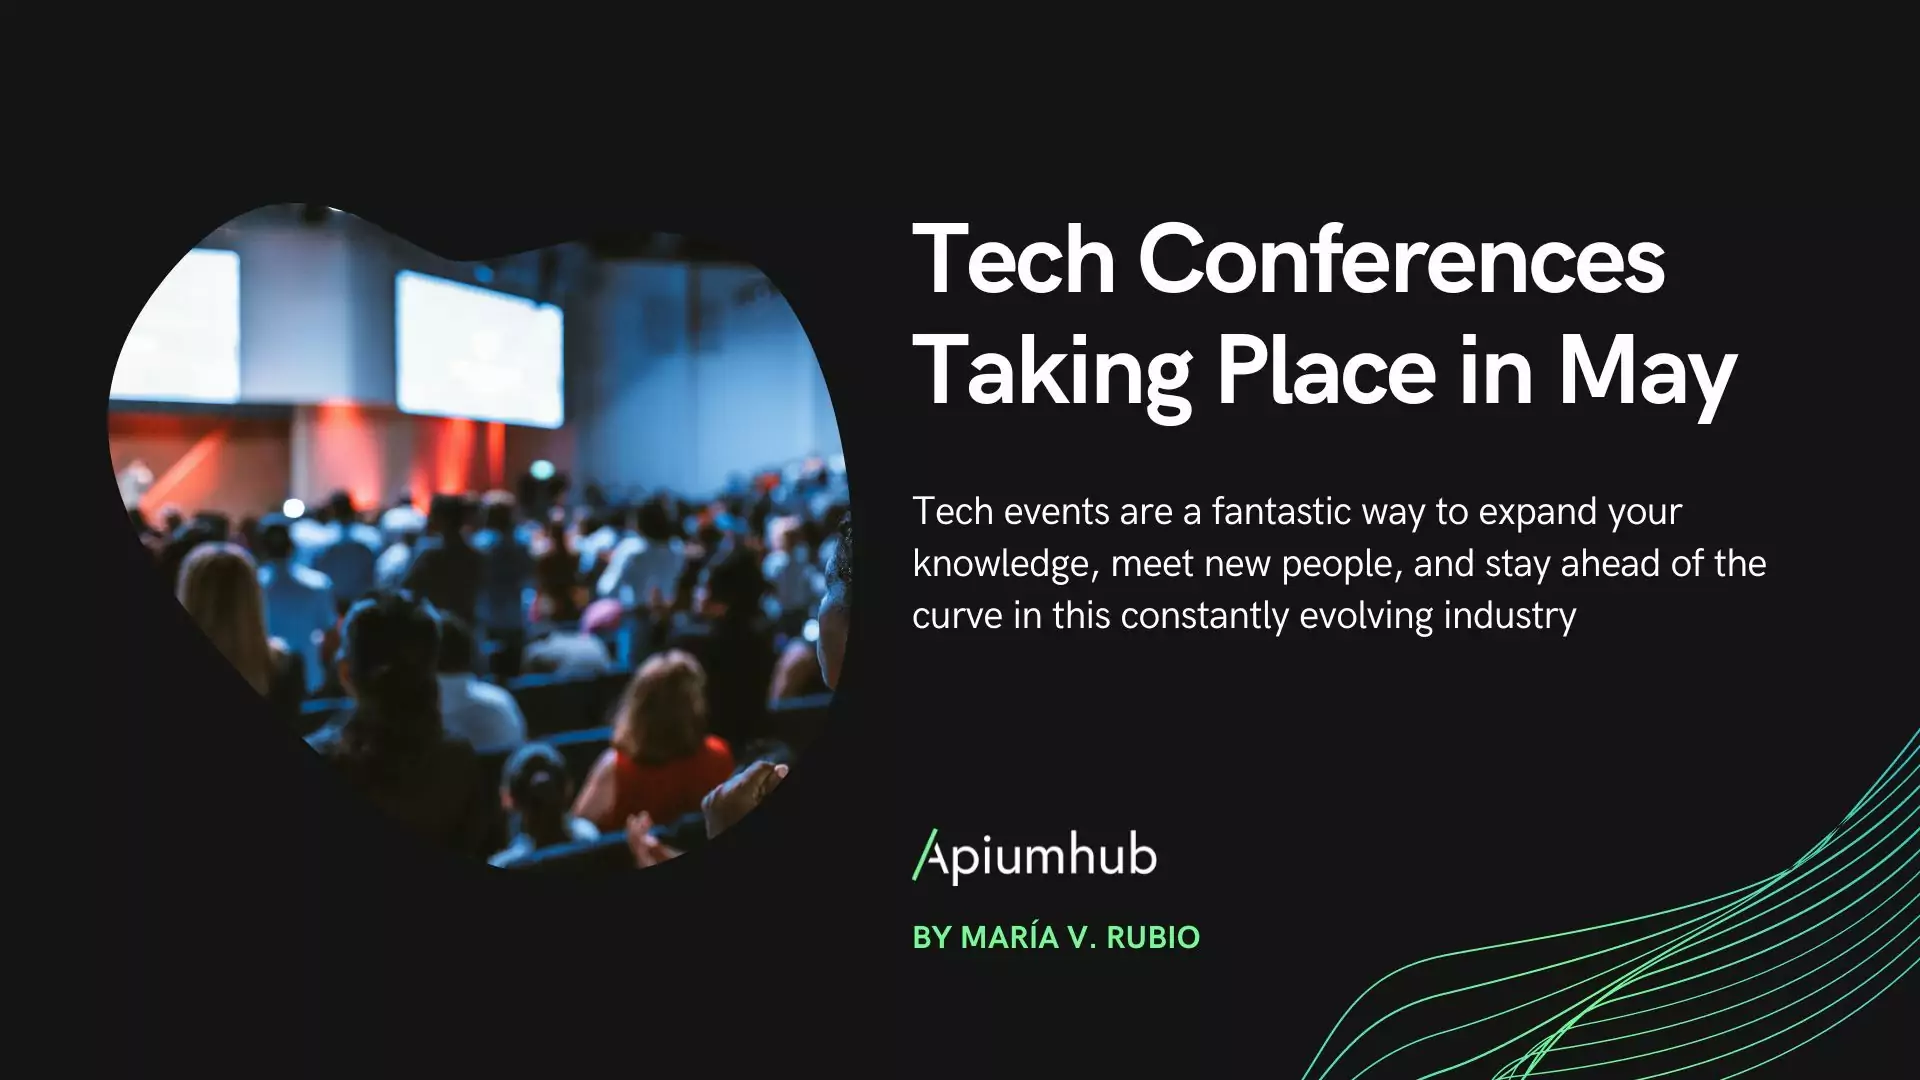 Tech conferences taking place in May